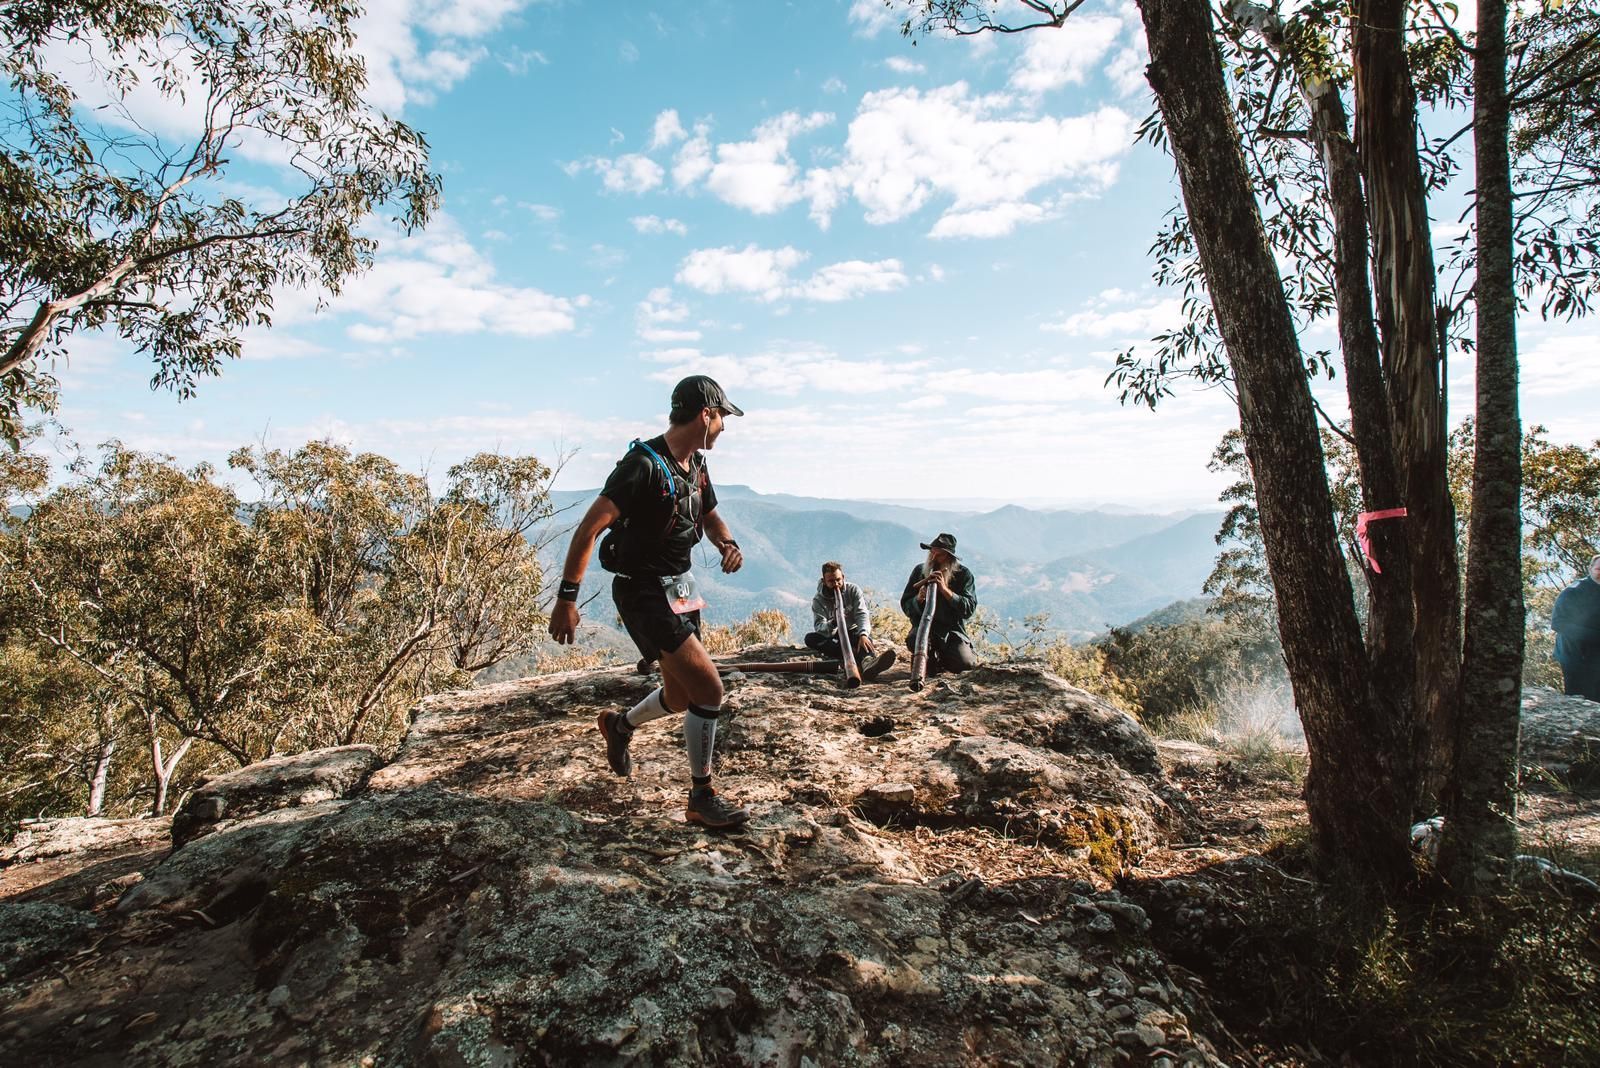 Ultra-Trail Australia by UTMB is the World’s second biggest Ultra-Trail run, held annually in the World Heritage Listed Blue Mountains, NSW. There are four distances on offer, the UTA11, UTA22, UTA50 and UTA100, along with a 1km kids race. UTA is part of the UTMB World Series, the world’s largest trail running series.